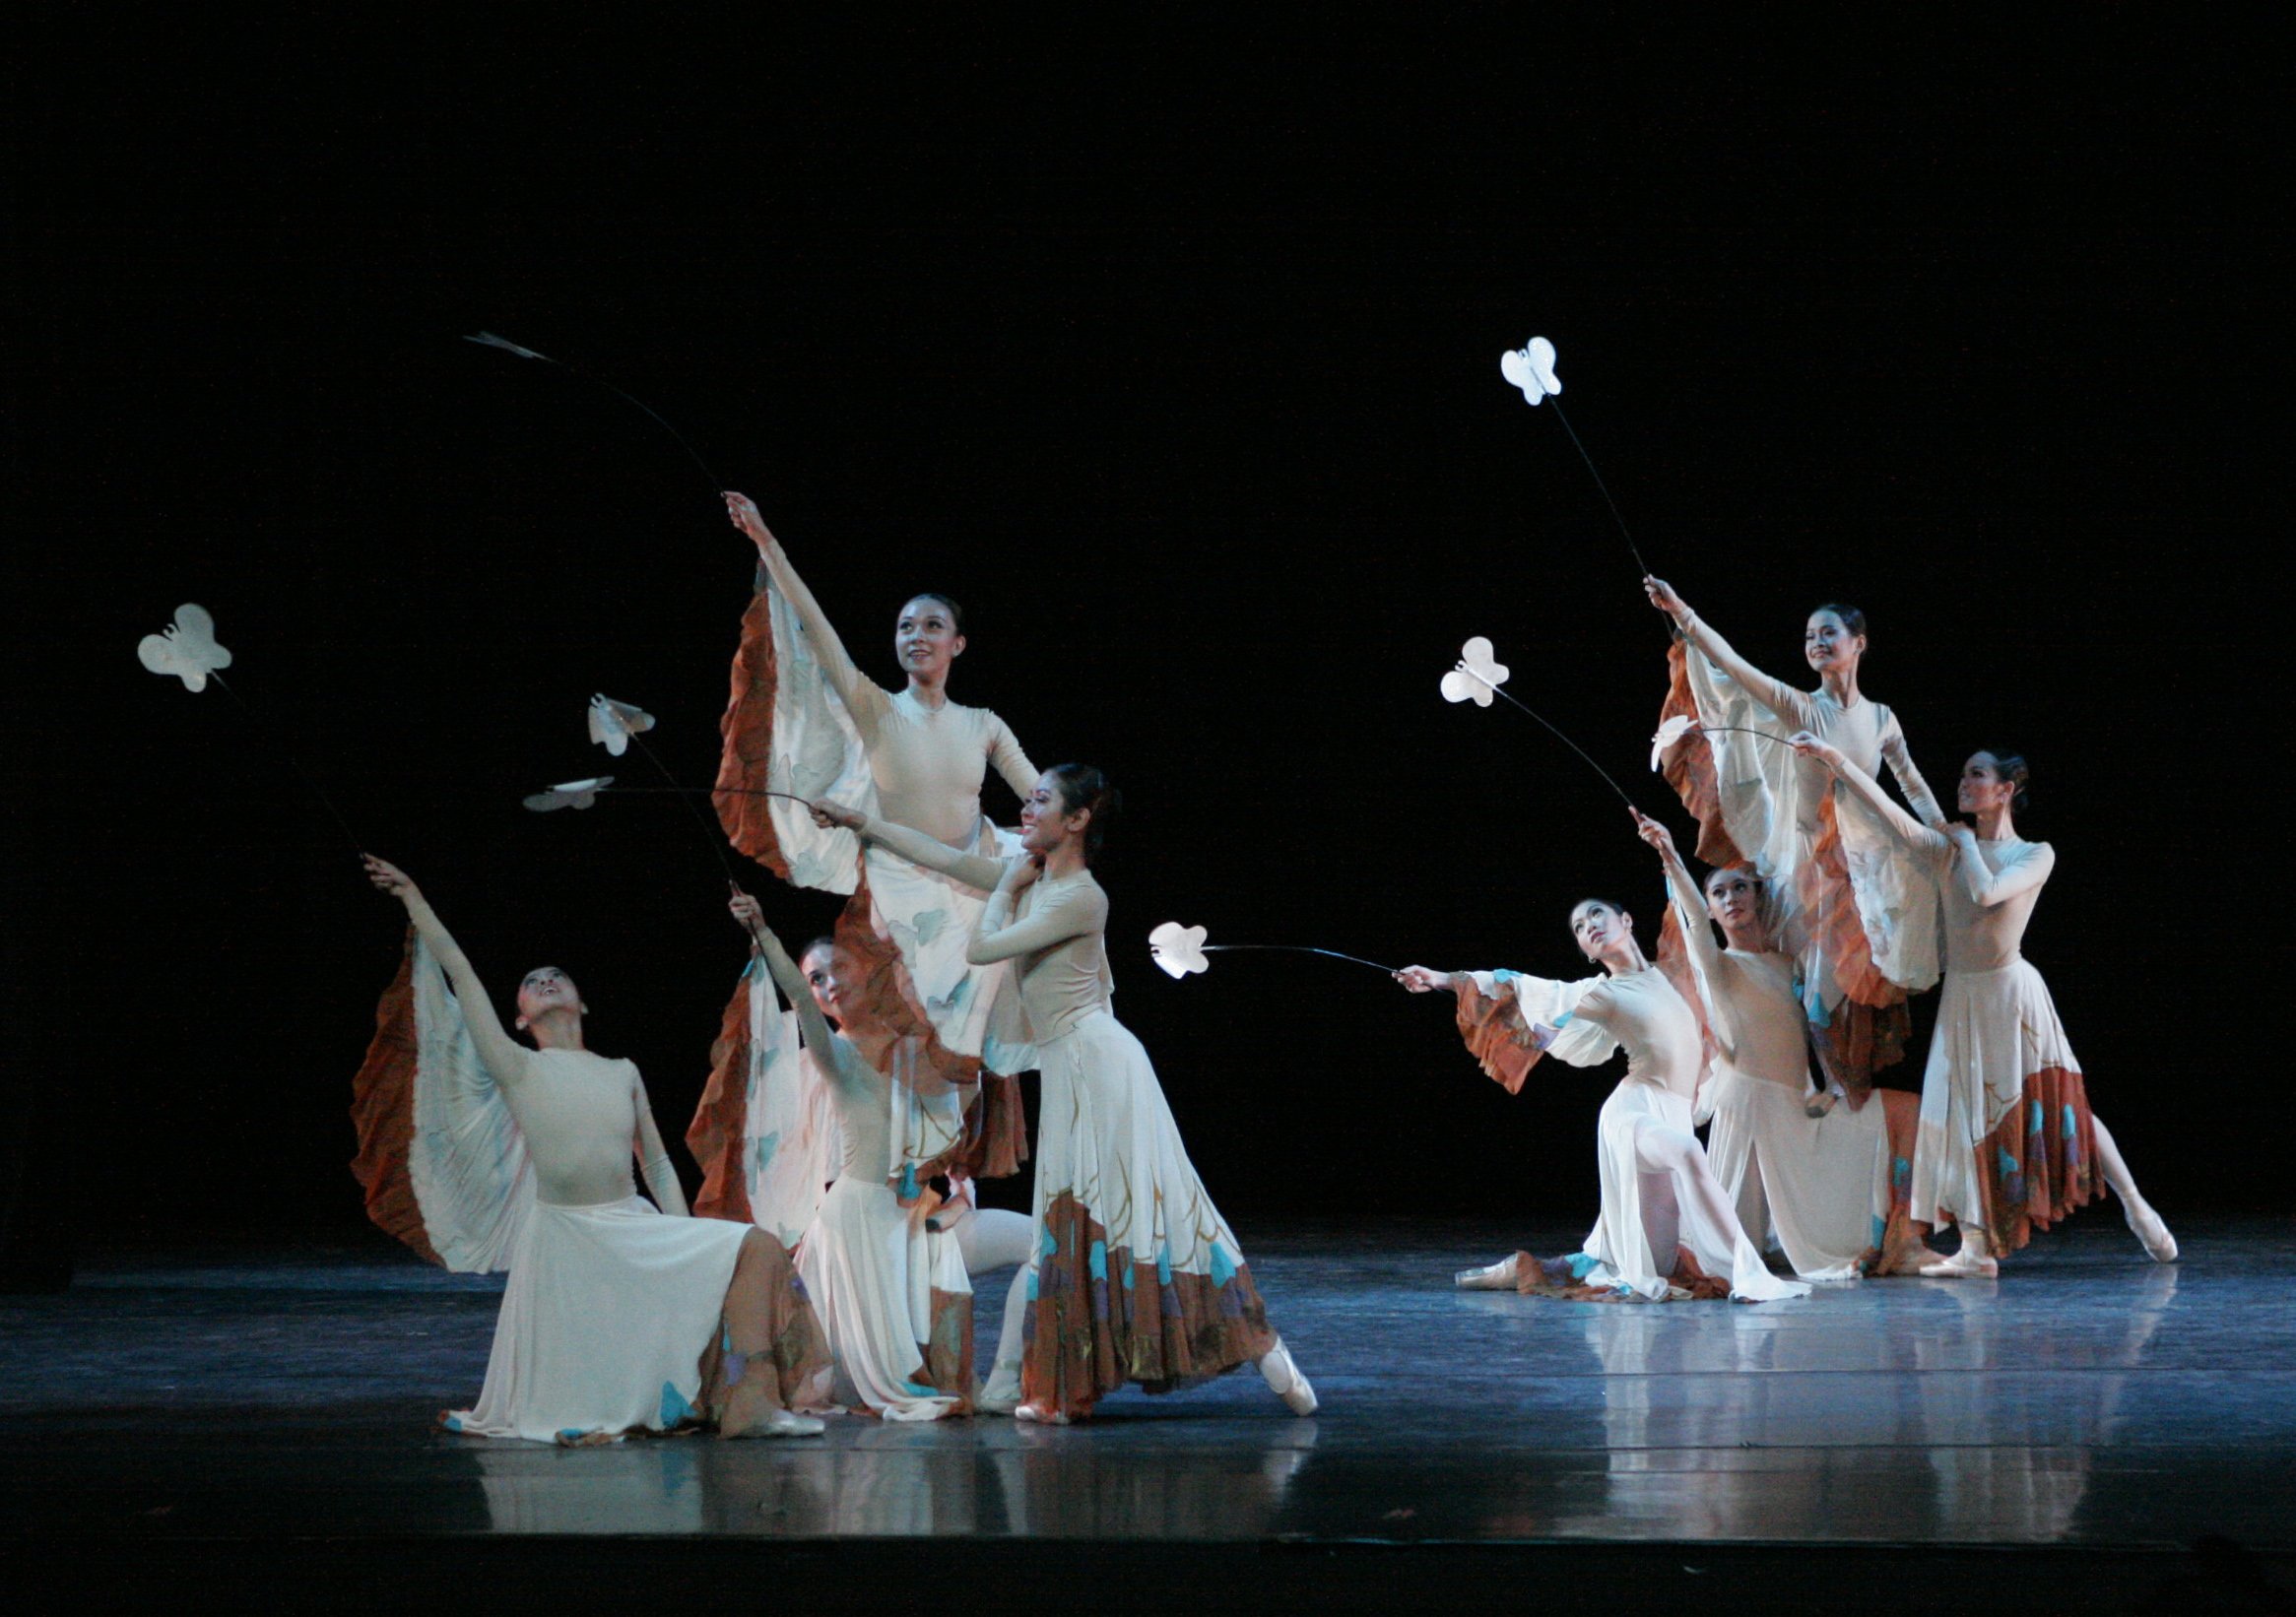    “Youthful, abstract, modern and light but dramatic” is how choreographer David Campos Cantero describes his work,  Velvet Wings,  which was staged anew by Ballet Manila in 2005. Channeling the beauty and fragility of butterflies, the dancers wear 